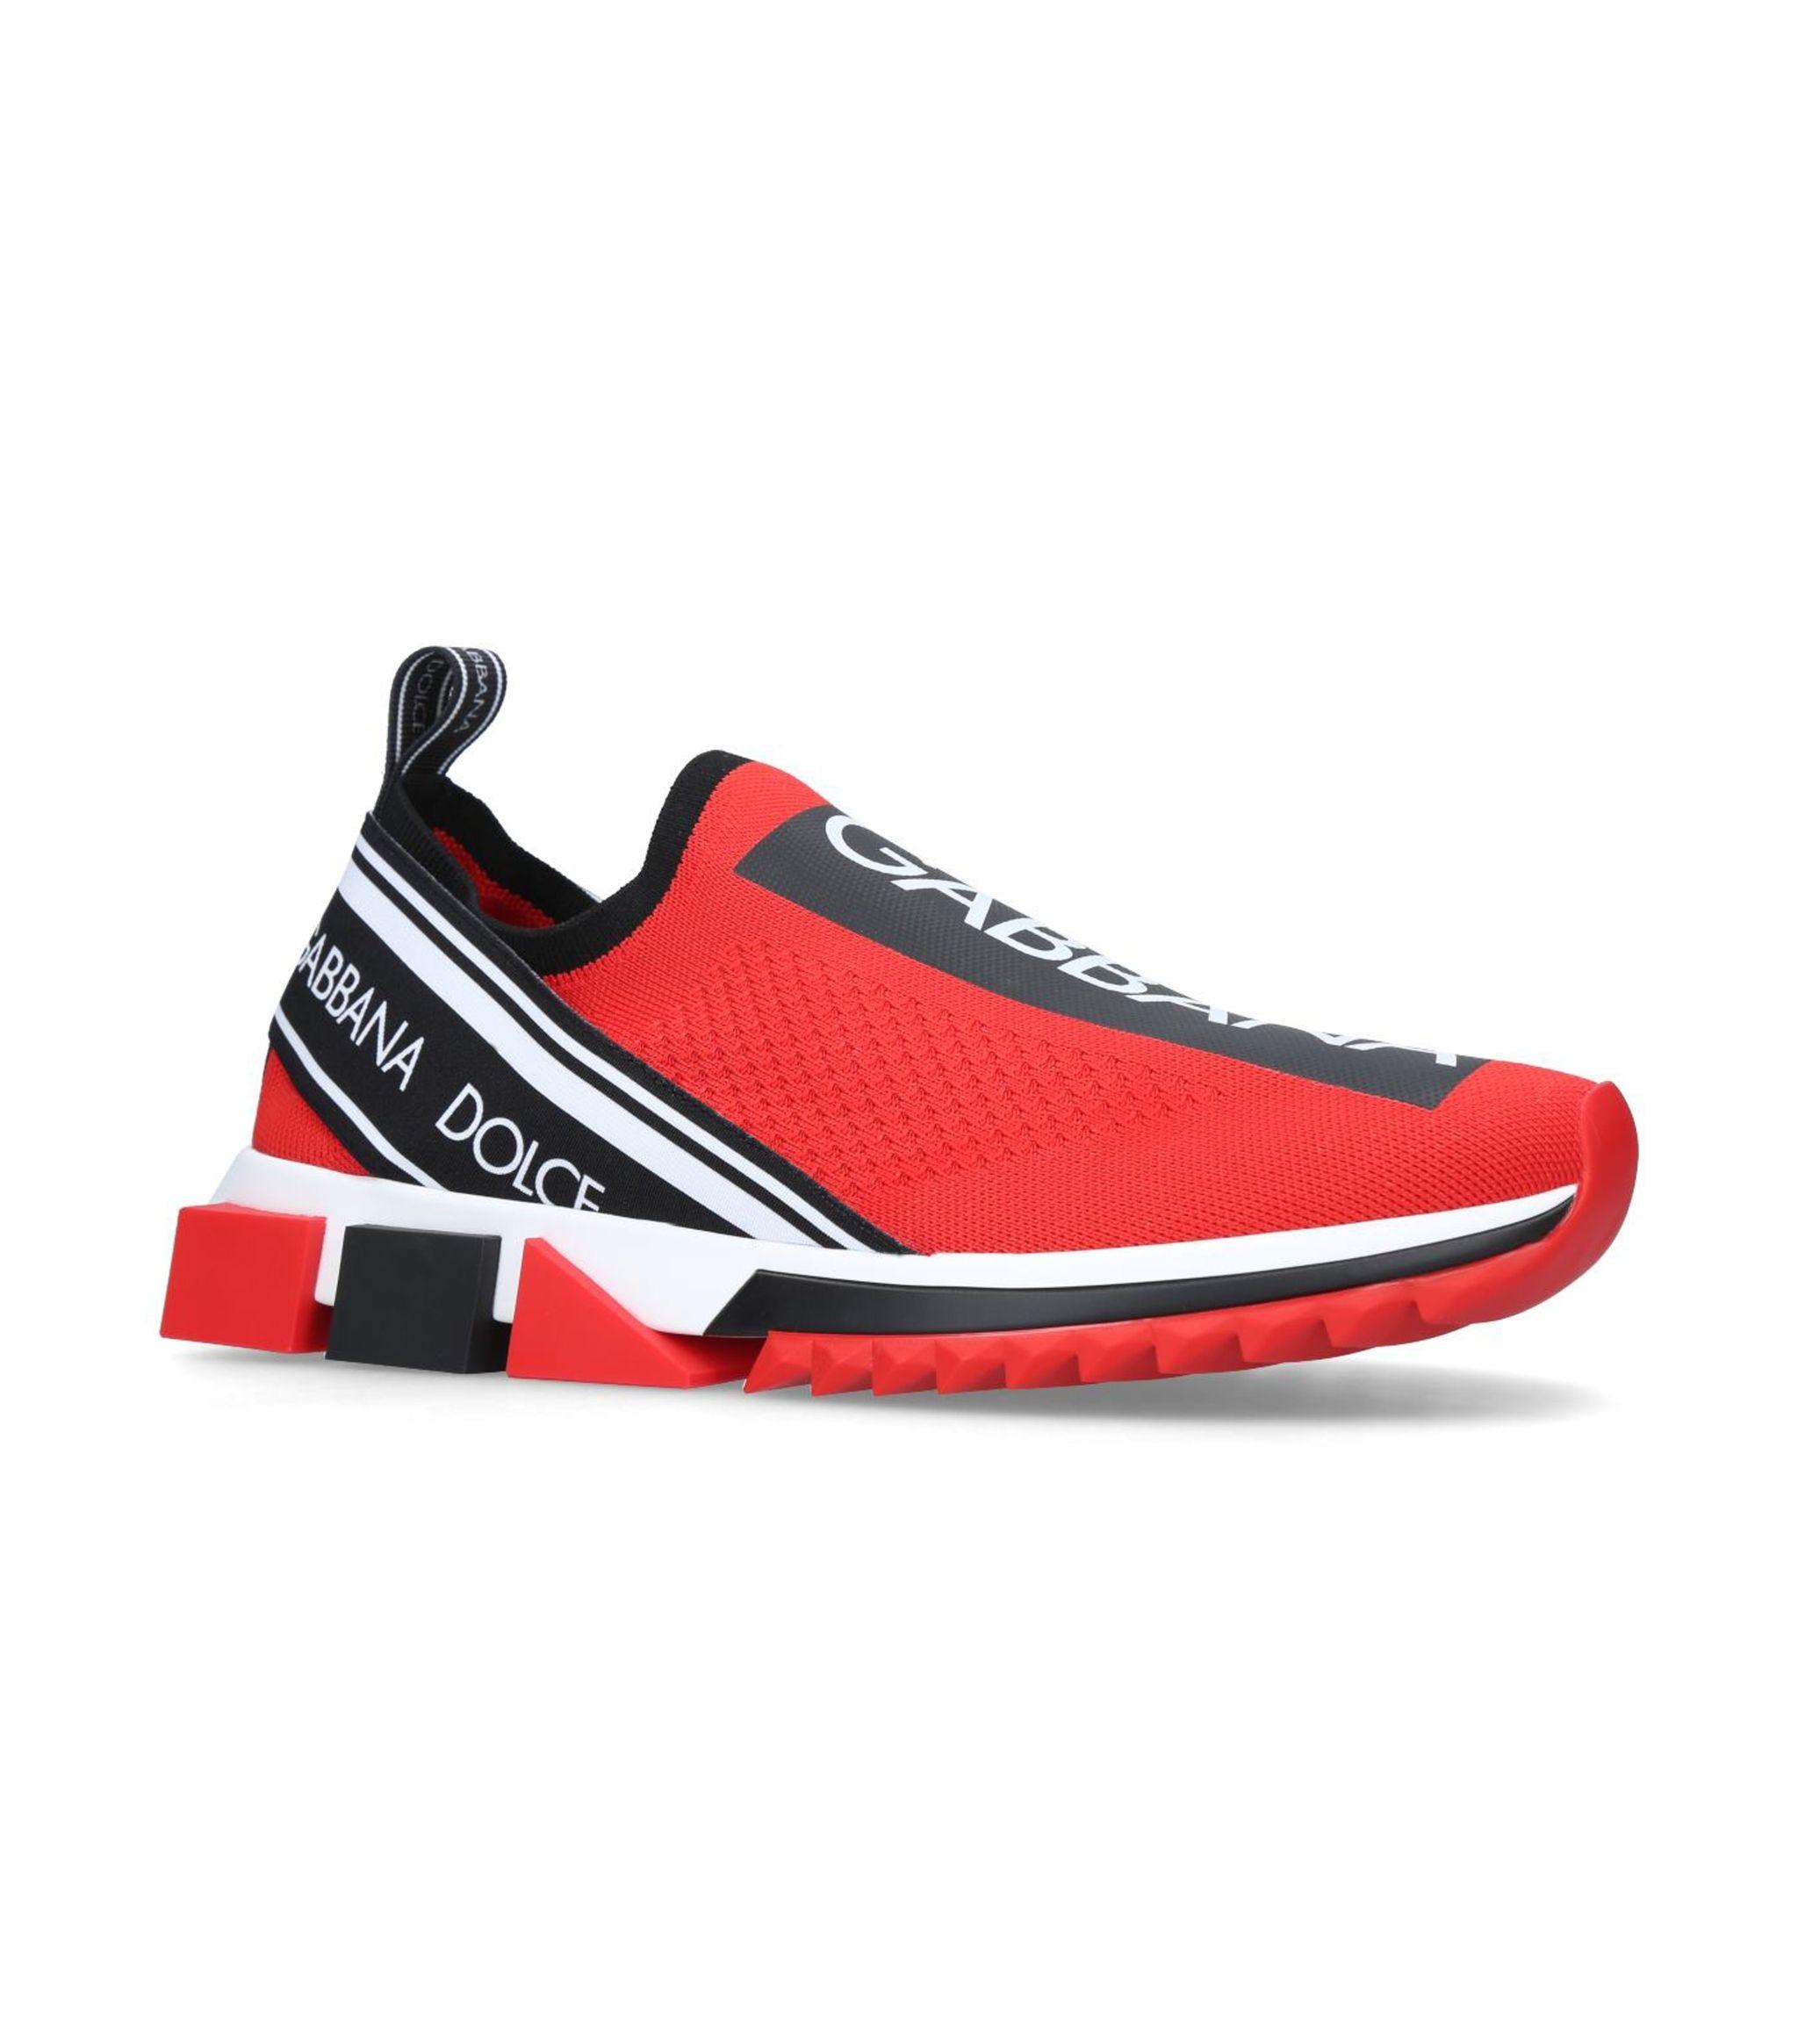 Dolce & Gabbana Rubber Sorrento Sneakers in Red,Black,White (Red) for ...